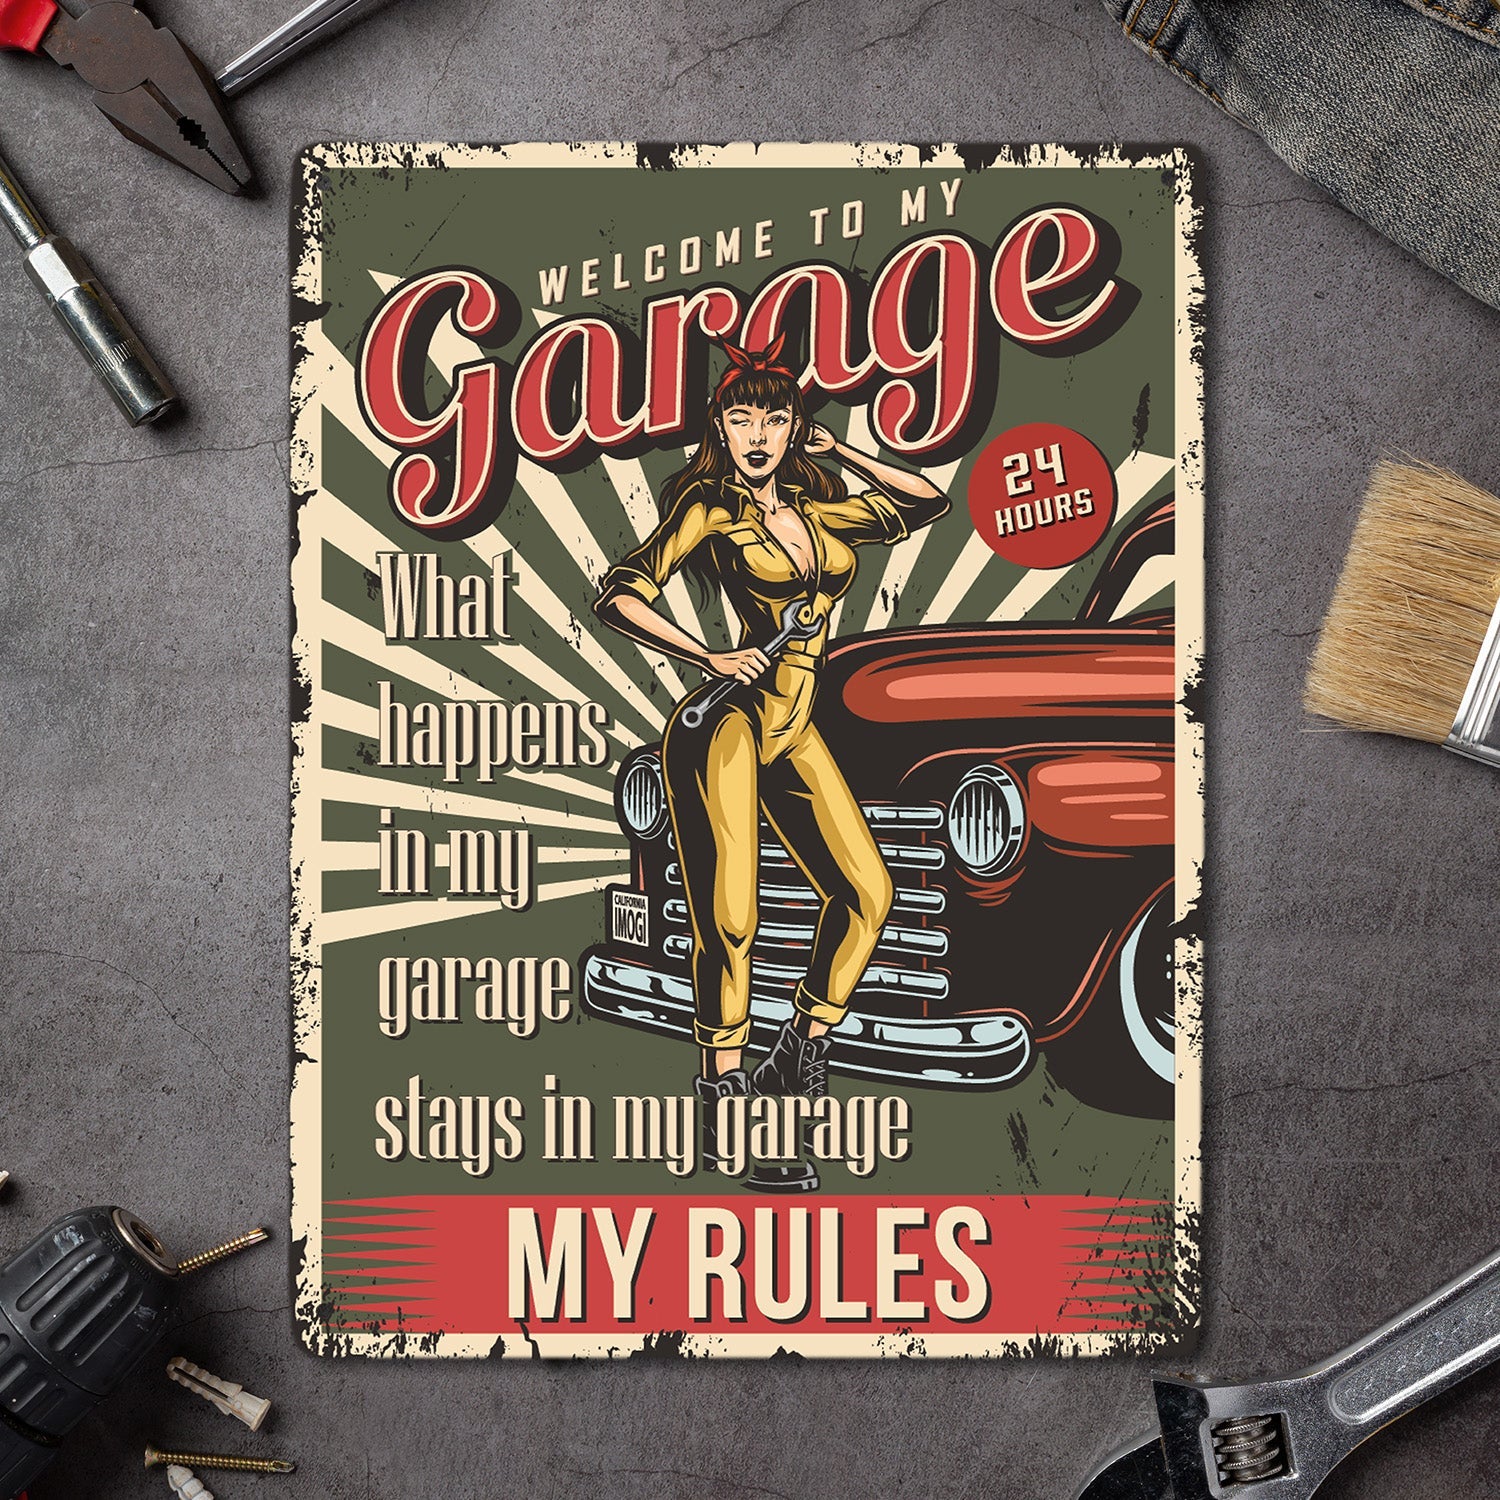 Welcome To My Garage, What Happens In My Garage Stay In My Garage, My Rules